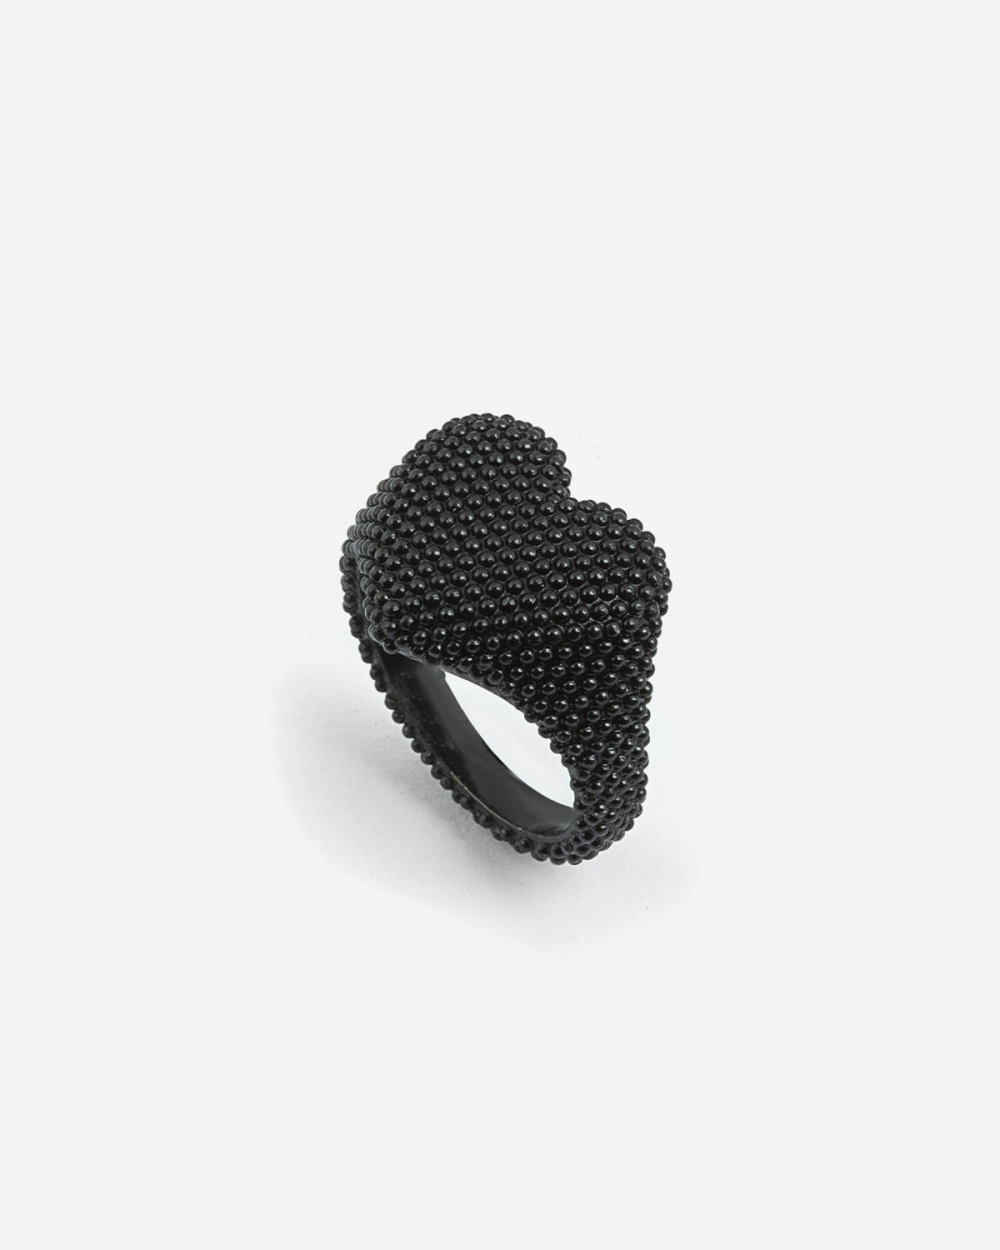 TOTAL BLACK DOTTED HEART SIGNET RING